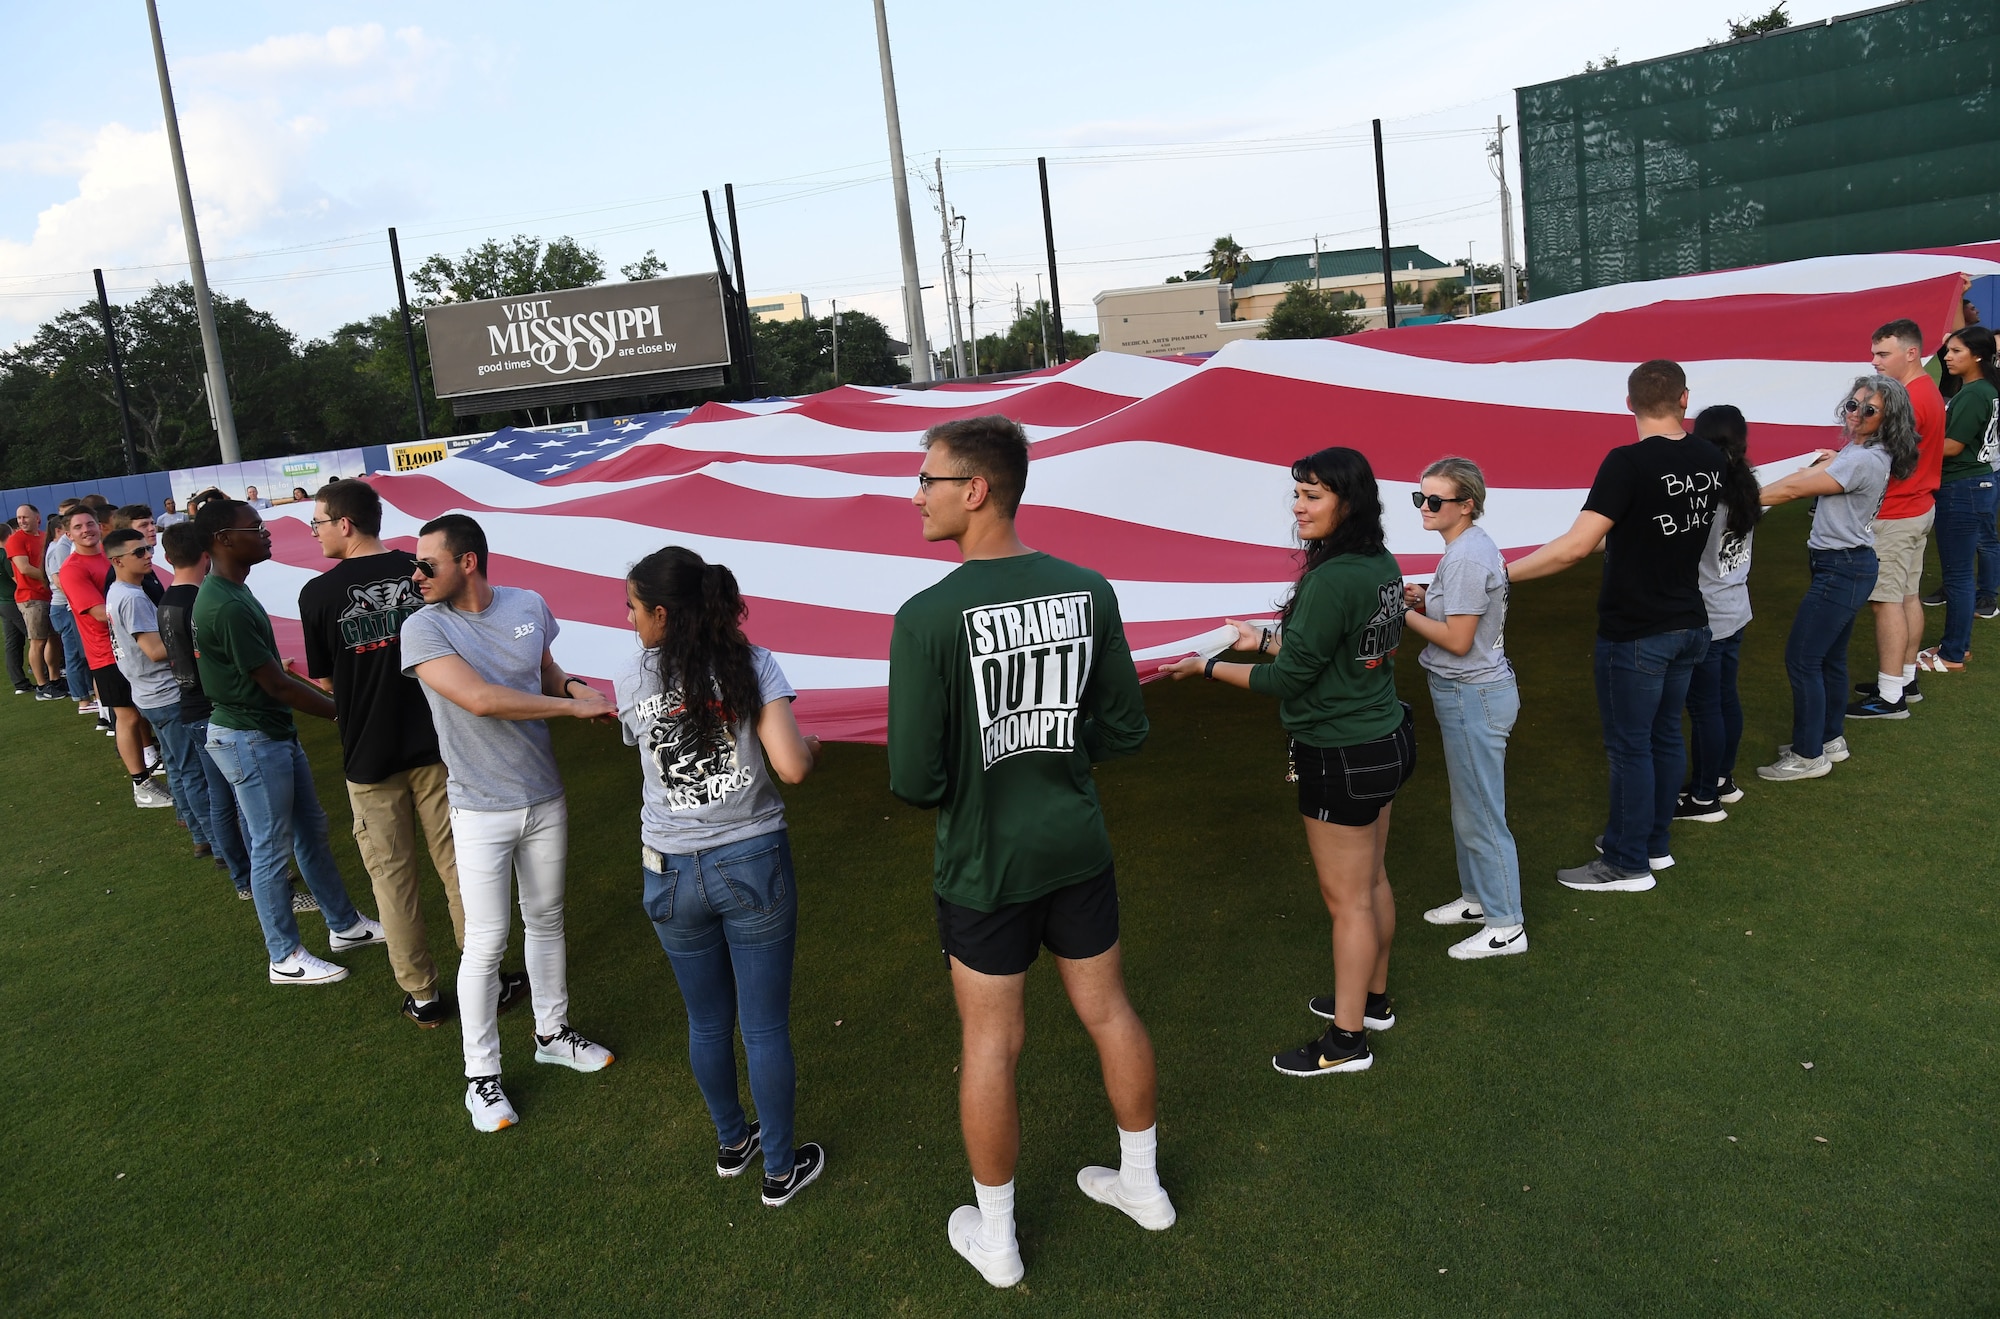 Airmen from the 81st Training Group hold a U.S. Flag during the Biloxi Shuckers Minor League Baseball game in Biloxi, Mississippi, June 11, 2022. The Shuckers hosted a military appreciation night where service members received free tickets. (U.S. Air Force photo by Kemberly Groue)